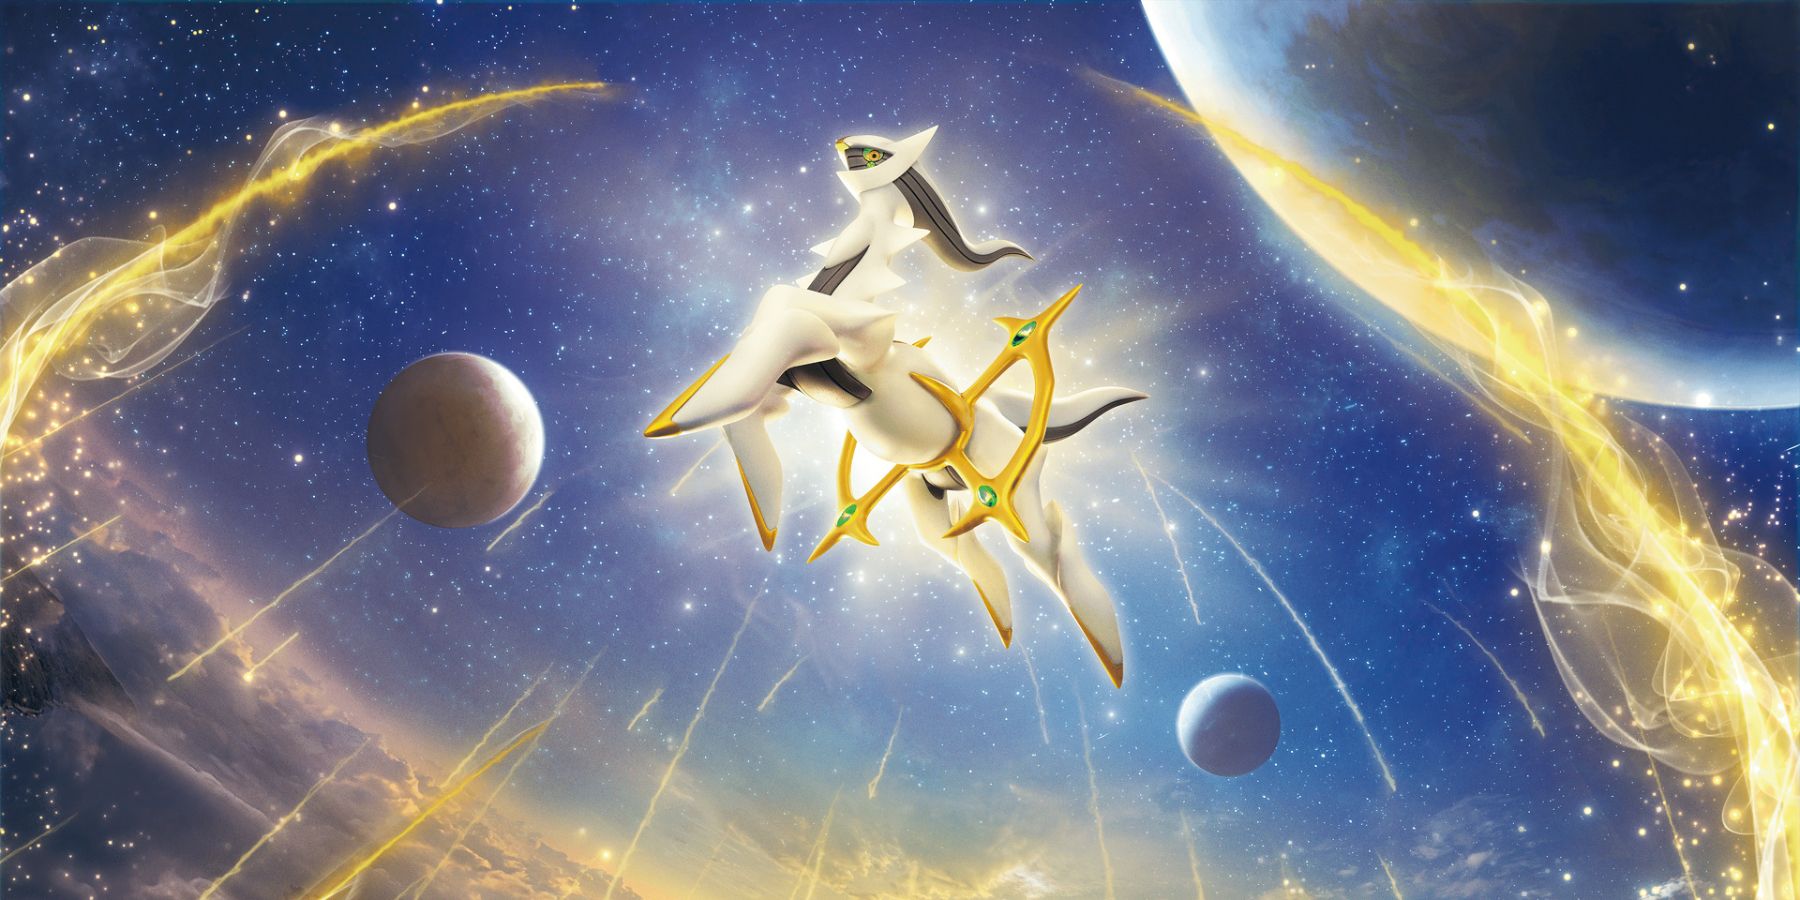 Pokemon Legends: Arceus is getting an anime series